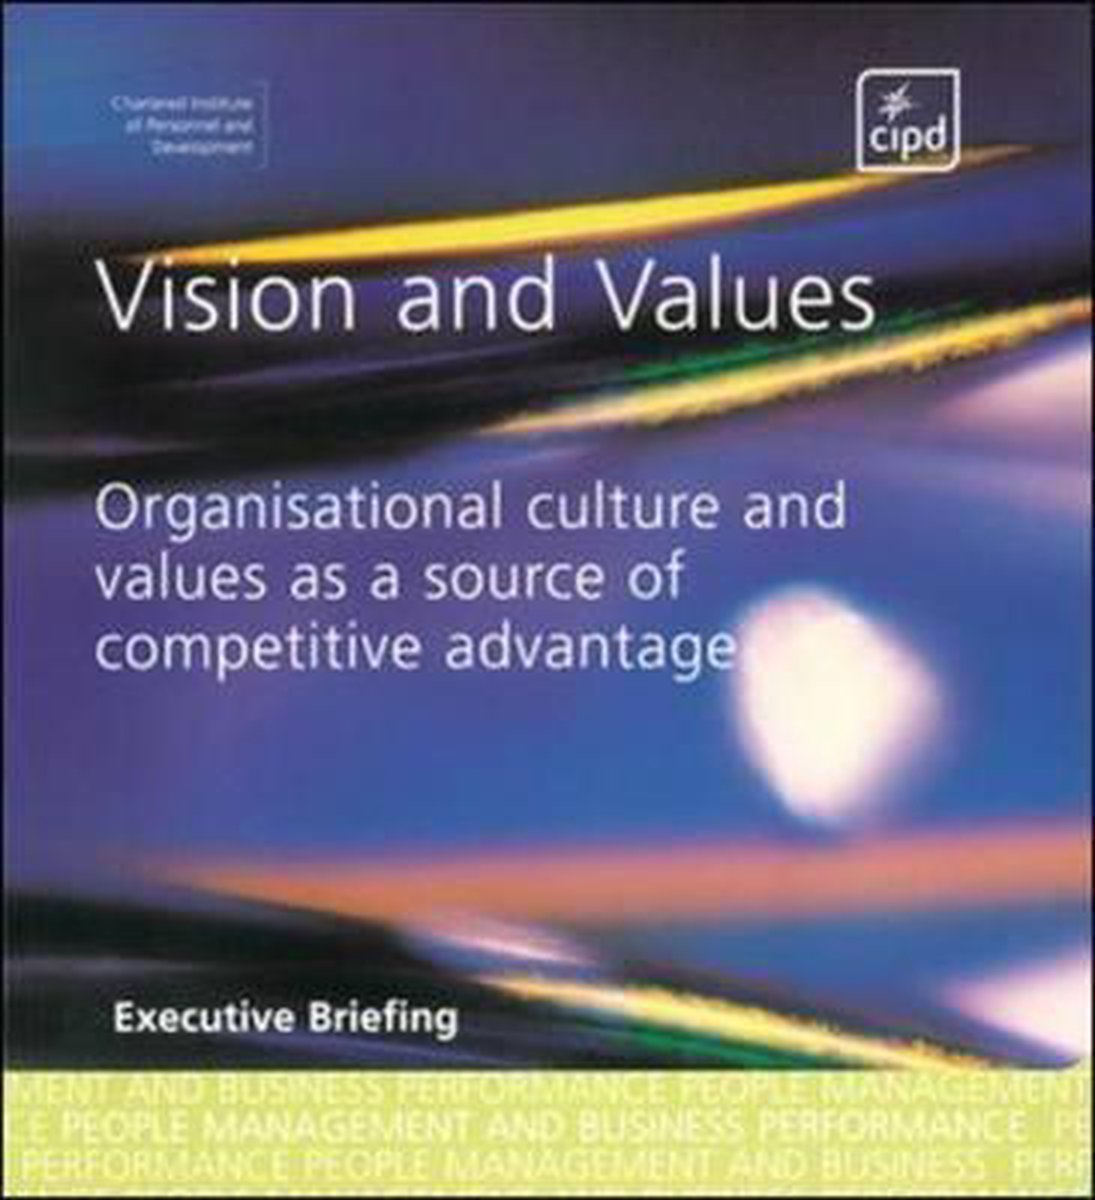 Vision and Values - The Cipd